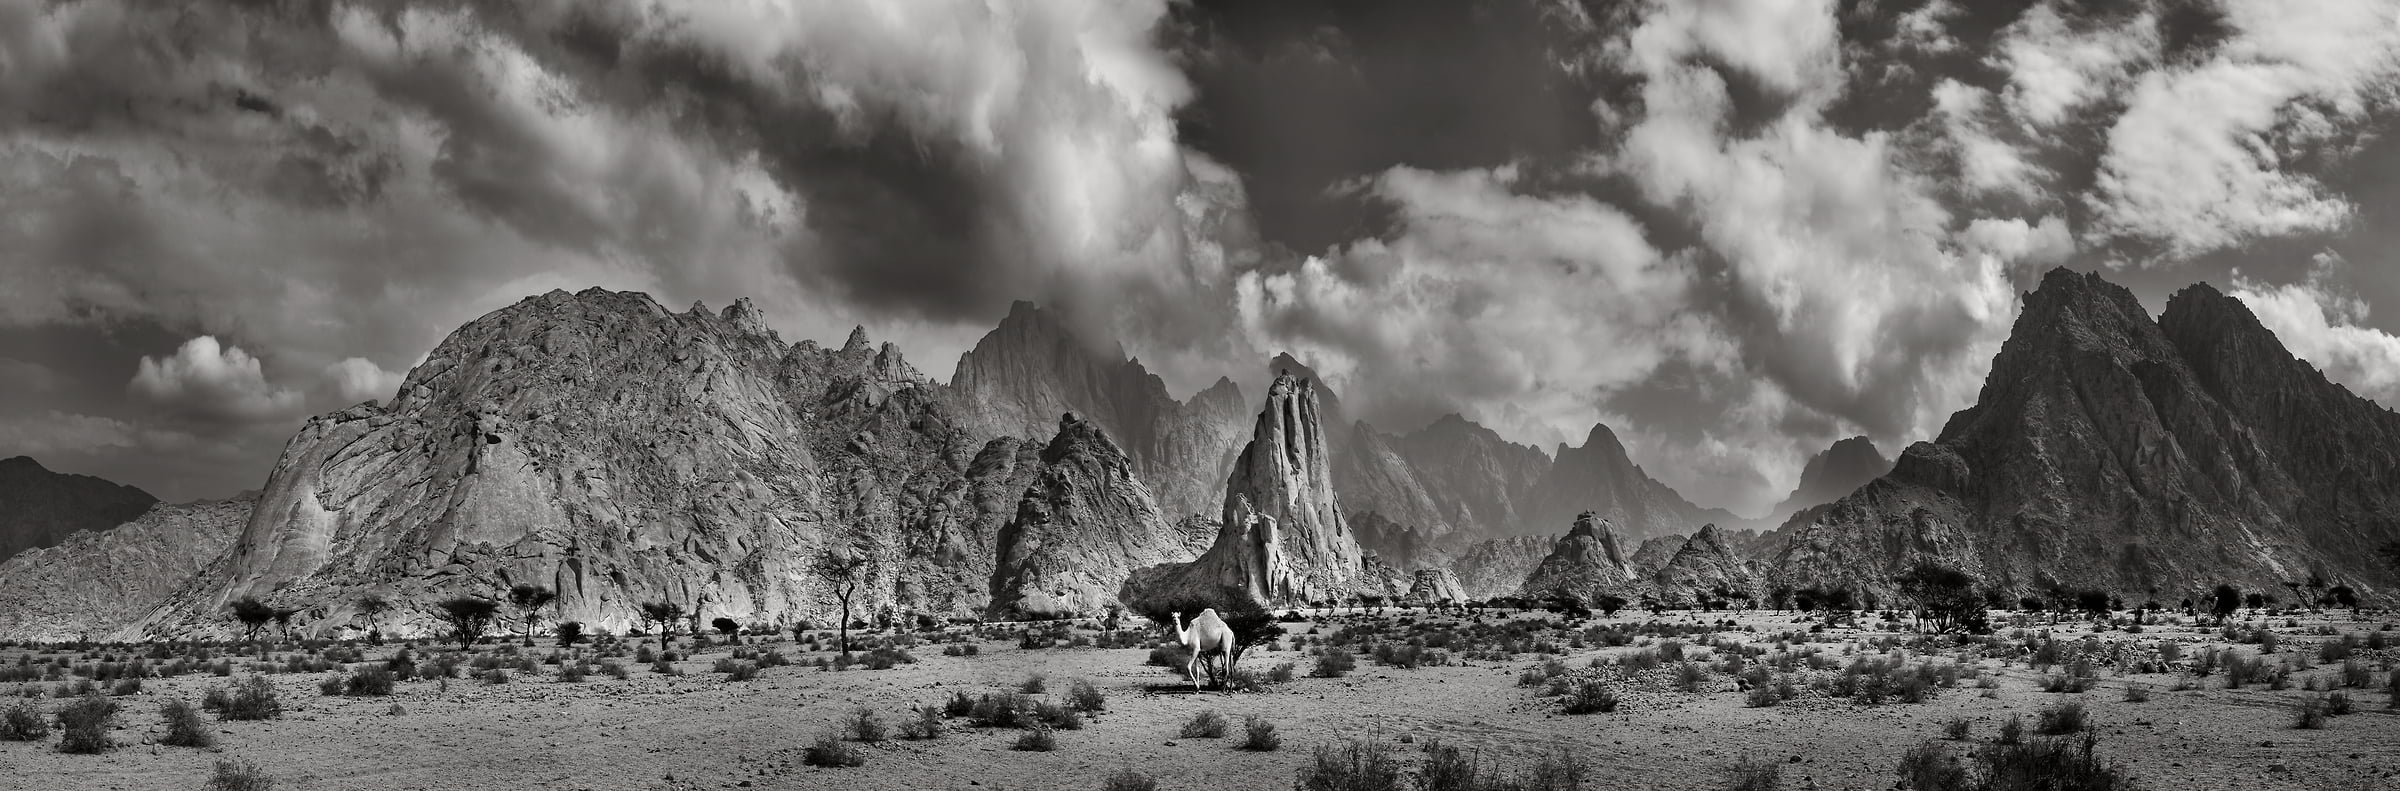 216 megapixels! A very high resolution, large-format black & white photo print of a desert landscape with a camel and mountains; photograph created by Peter Rodger in Tabuk, Saudi Arabia